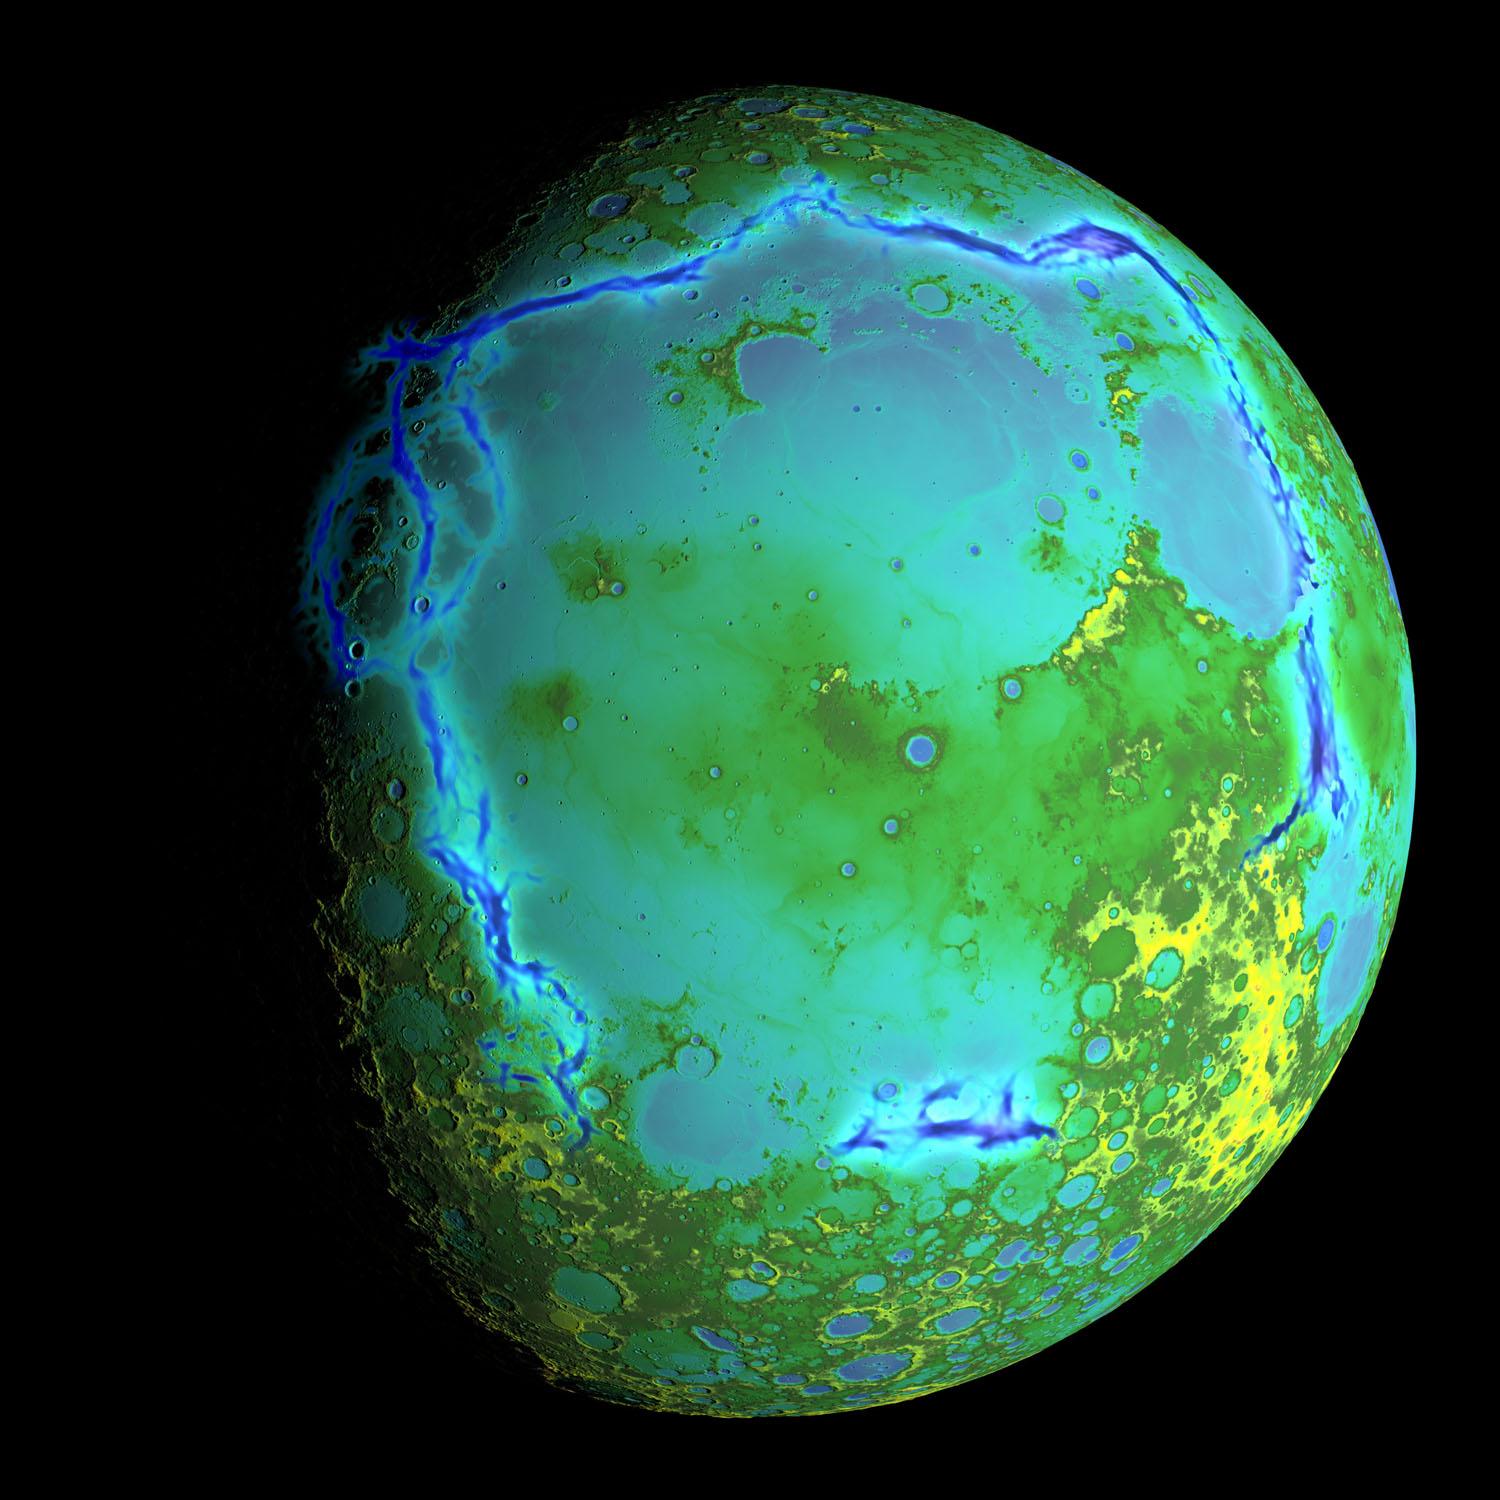 A rendered image of the Moon in color. Shades of blue, green, and yellow highlight topographical features, whereas blue represents gravitational anomalies.